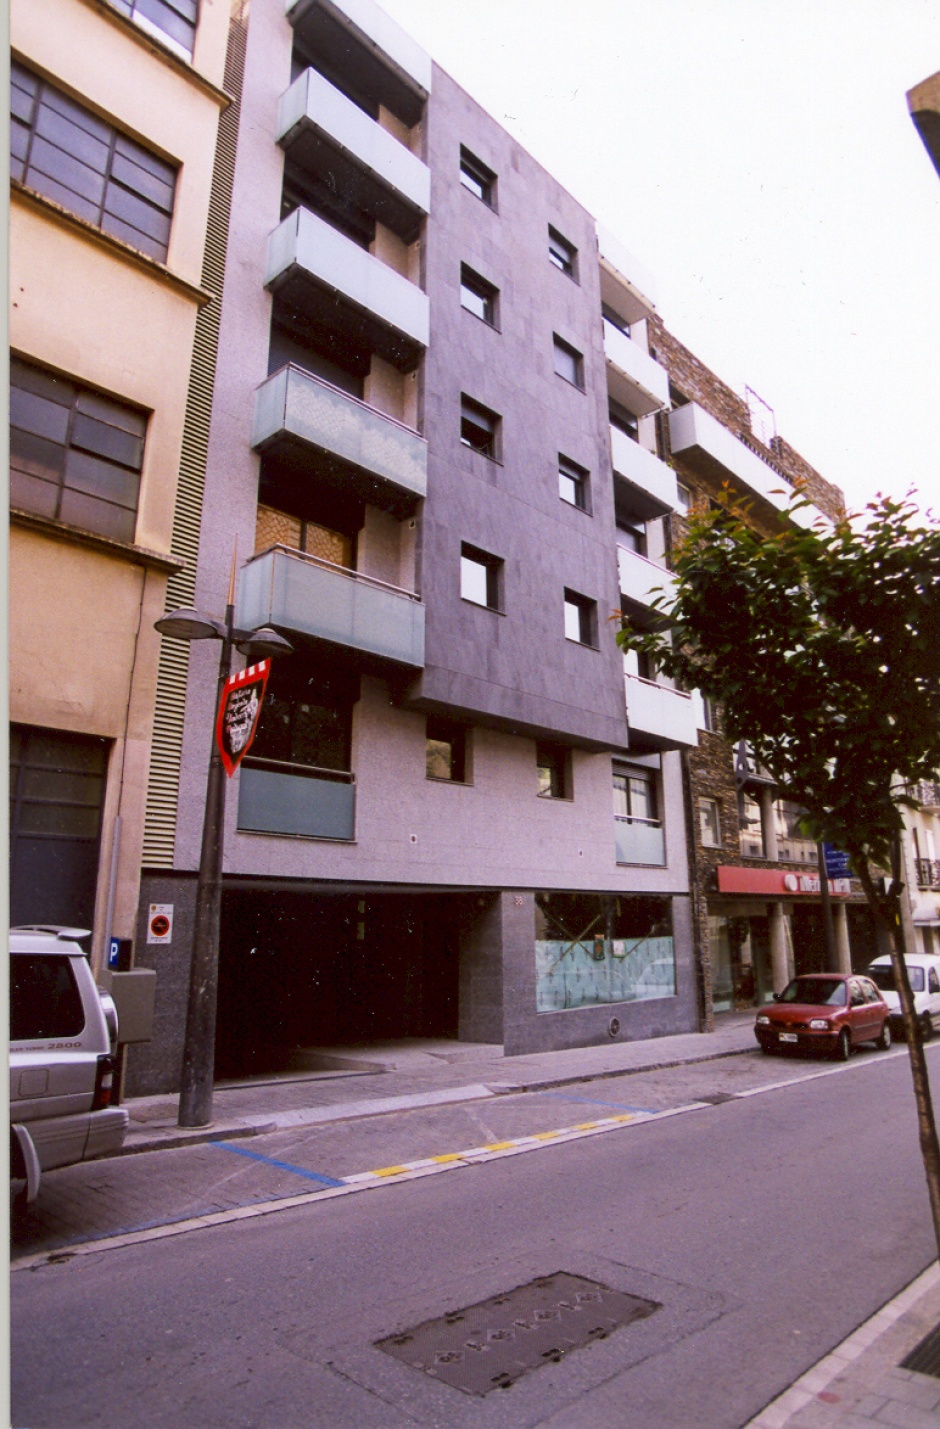 Residential building on Av. Virgin of Canòlich, 38, Architecture (Principality of Andorra)